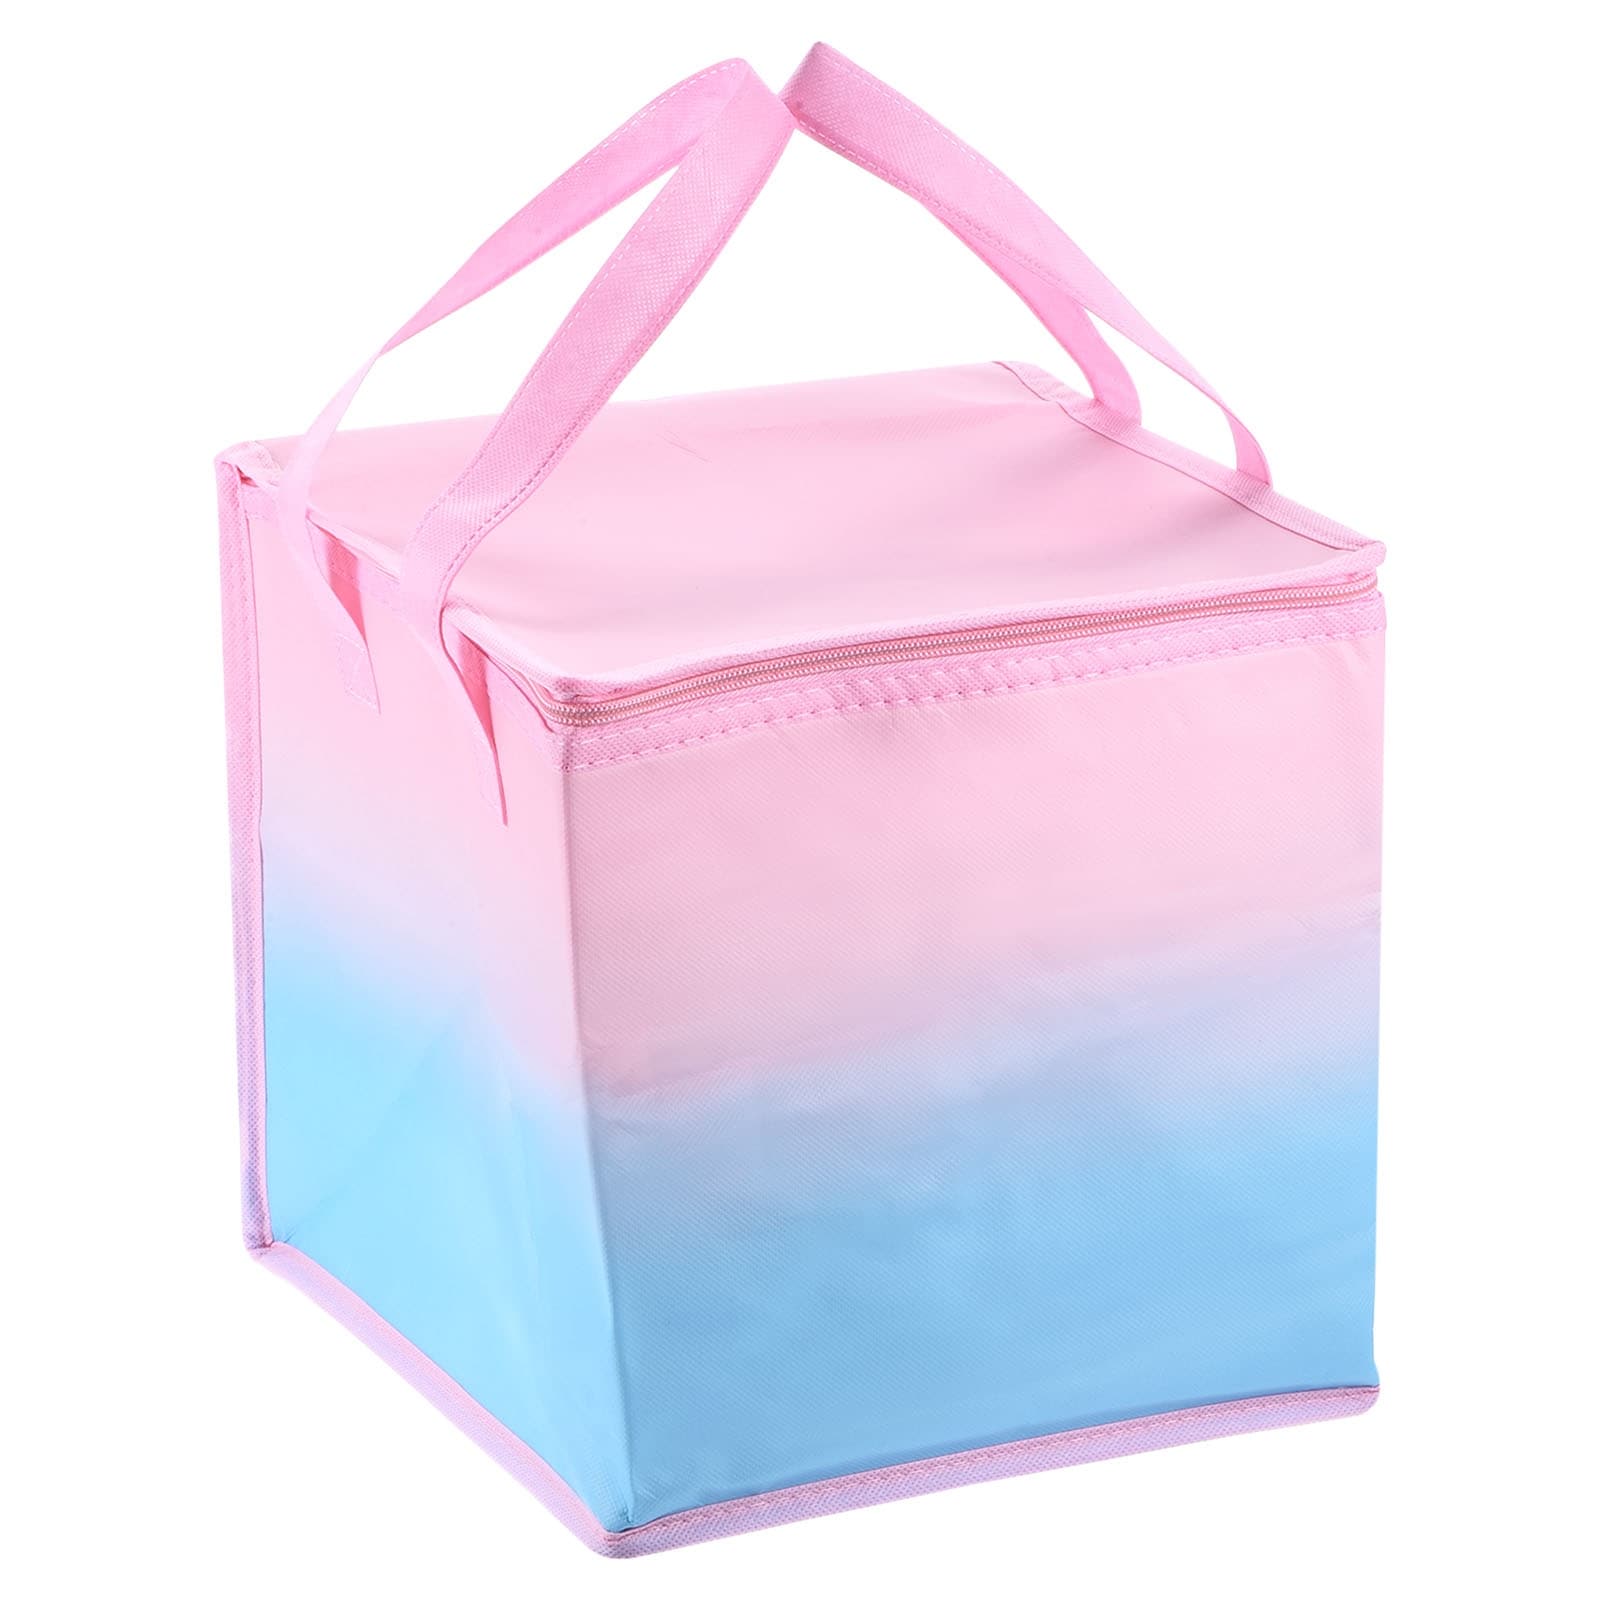 Insulated Grocery Bag Food Delivery Tote Food Container Pink Blue